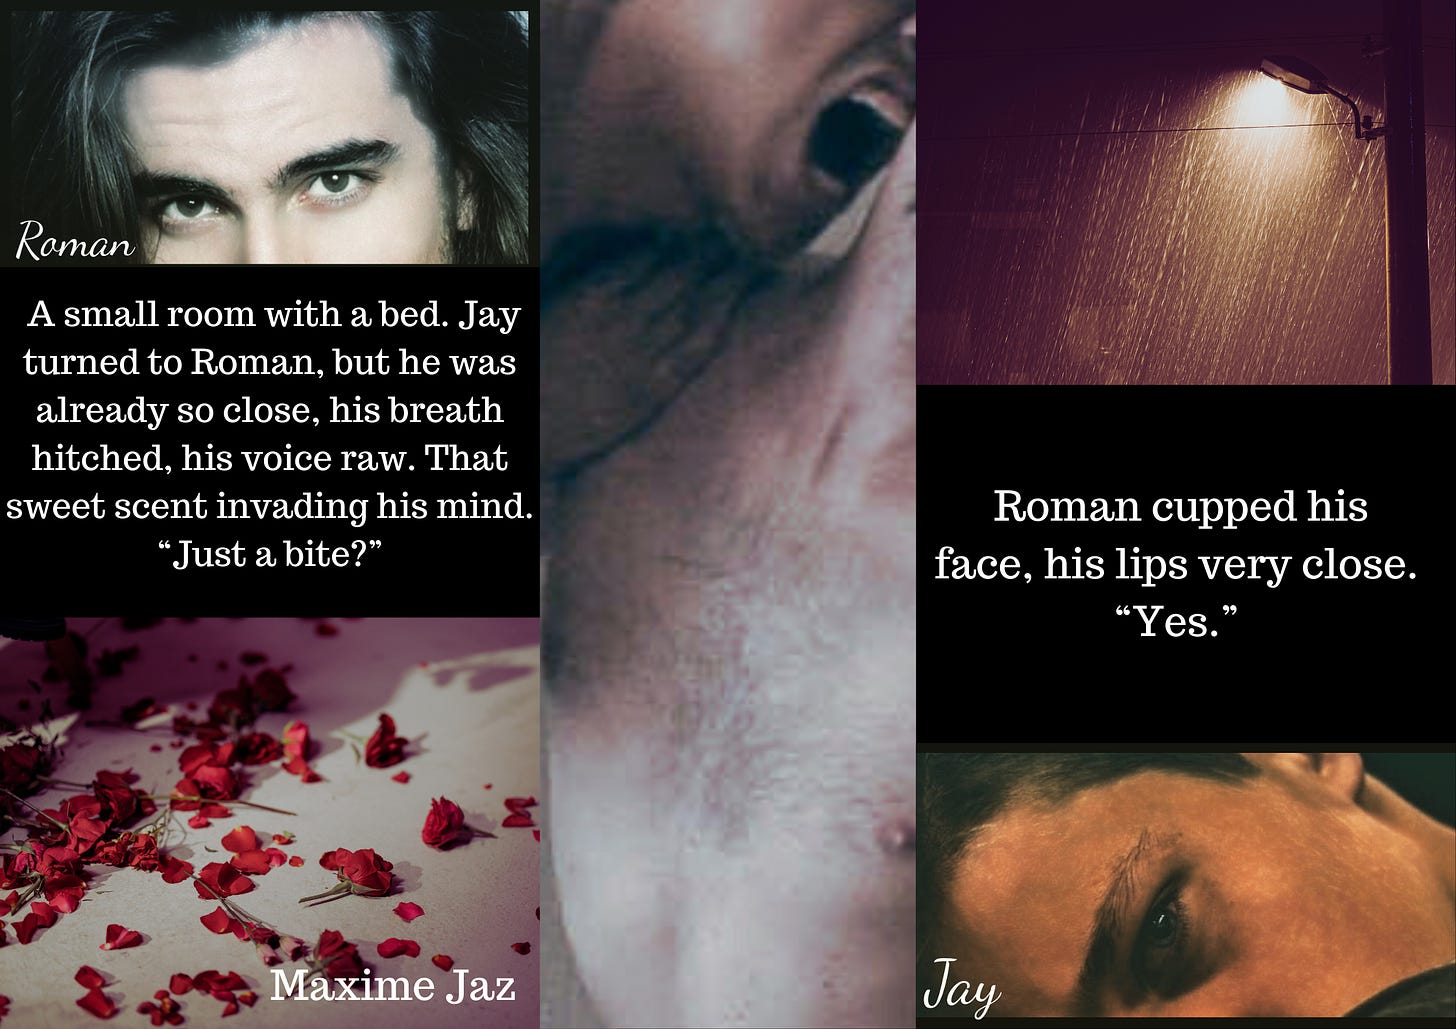 Moodboard for my vampire novel. 2 pics on the left: a man's dark eyes, with long black hair framing his pale face, captioned Roman. Under it a quote: A small room with a bed. Jay turned to Roman, but he was already so close, his breath hitched, his voice raw. That sweet scent invading his mind. "Just a bite?" Pic under it: red rose petals on a bed Middle pic: a man's open mouth on another man's neck Pic on the right. Top: street lamp under pouring rain Quote: Roman cupped his face, his lips very close. "yes." Pic under it: a young man's grey eye, captioned Jay